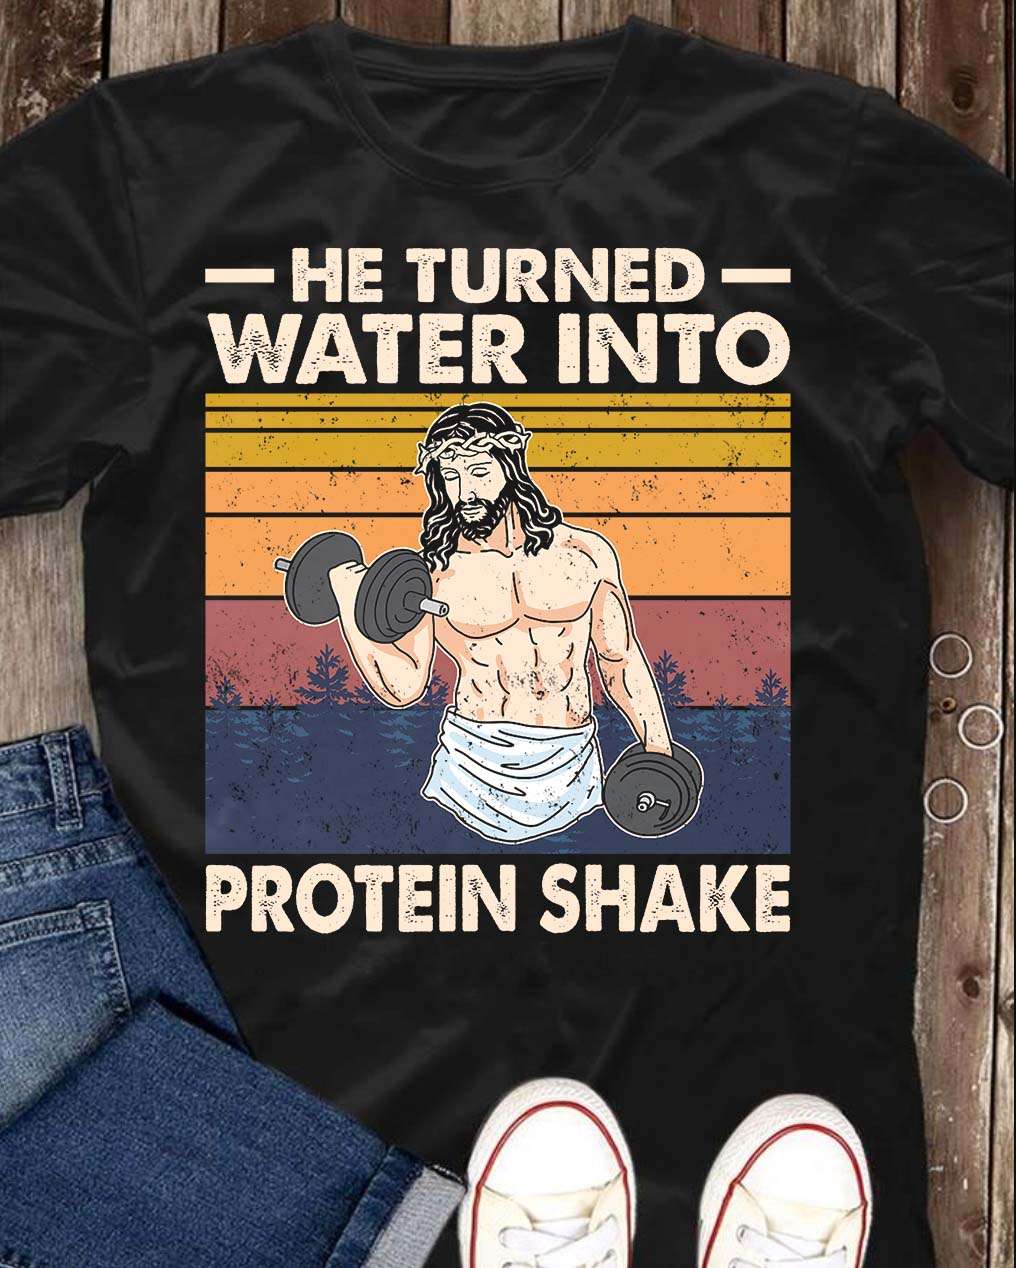 Jesus Lifting Weight - He turned water into protein shake